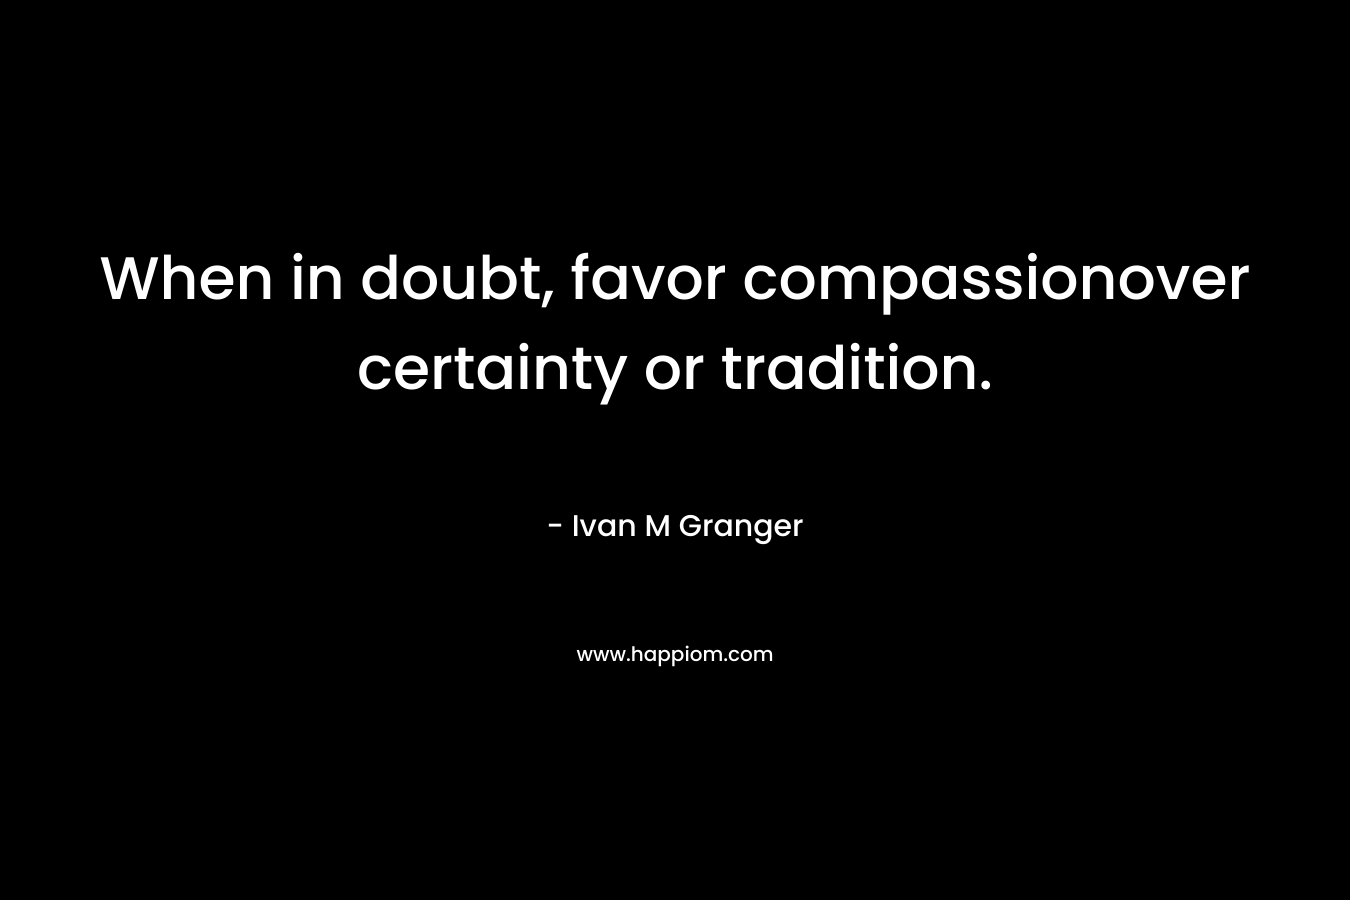 When in doubt, favor compassionover certainty or tradition. – Ivan M Granger